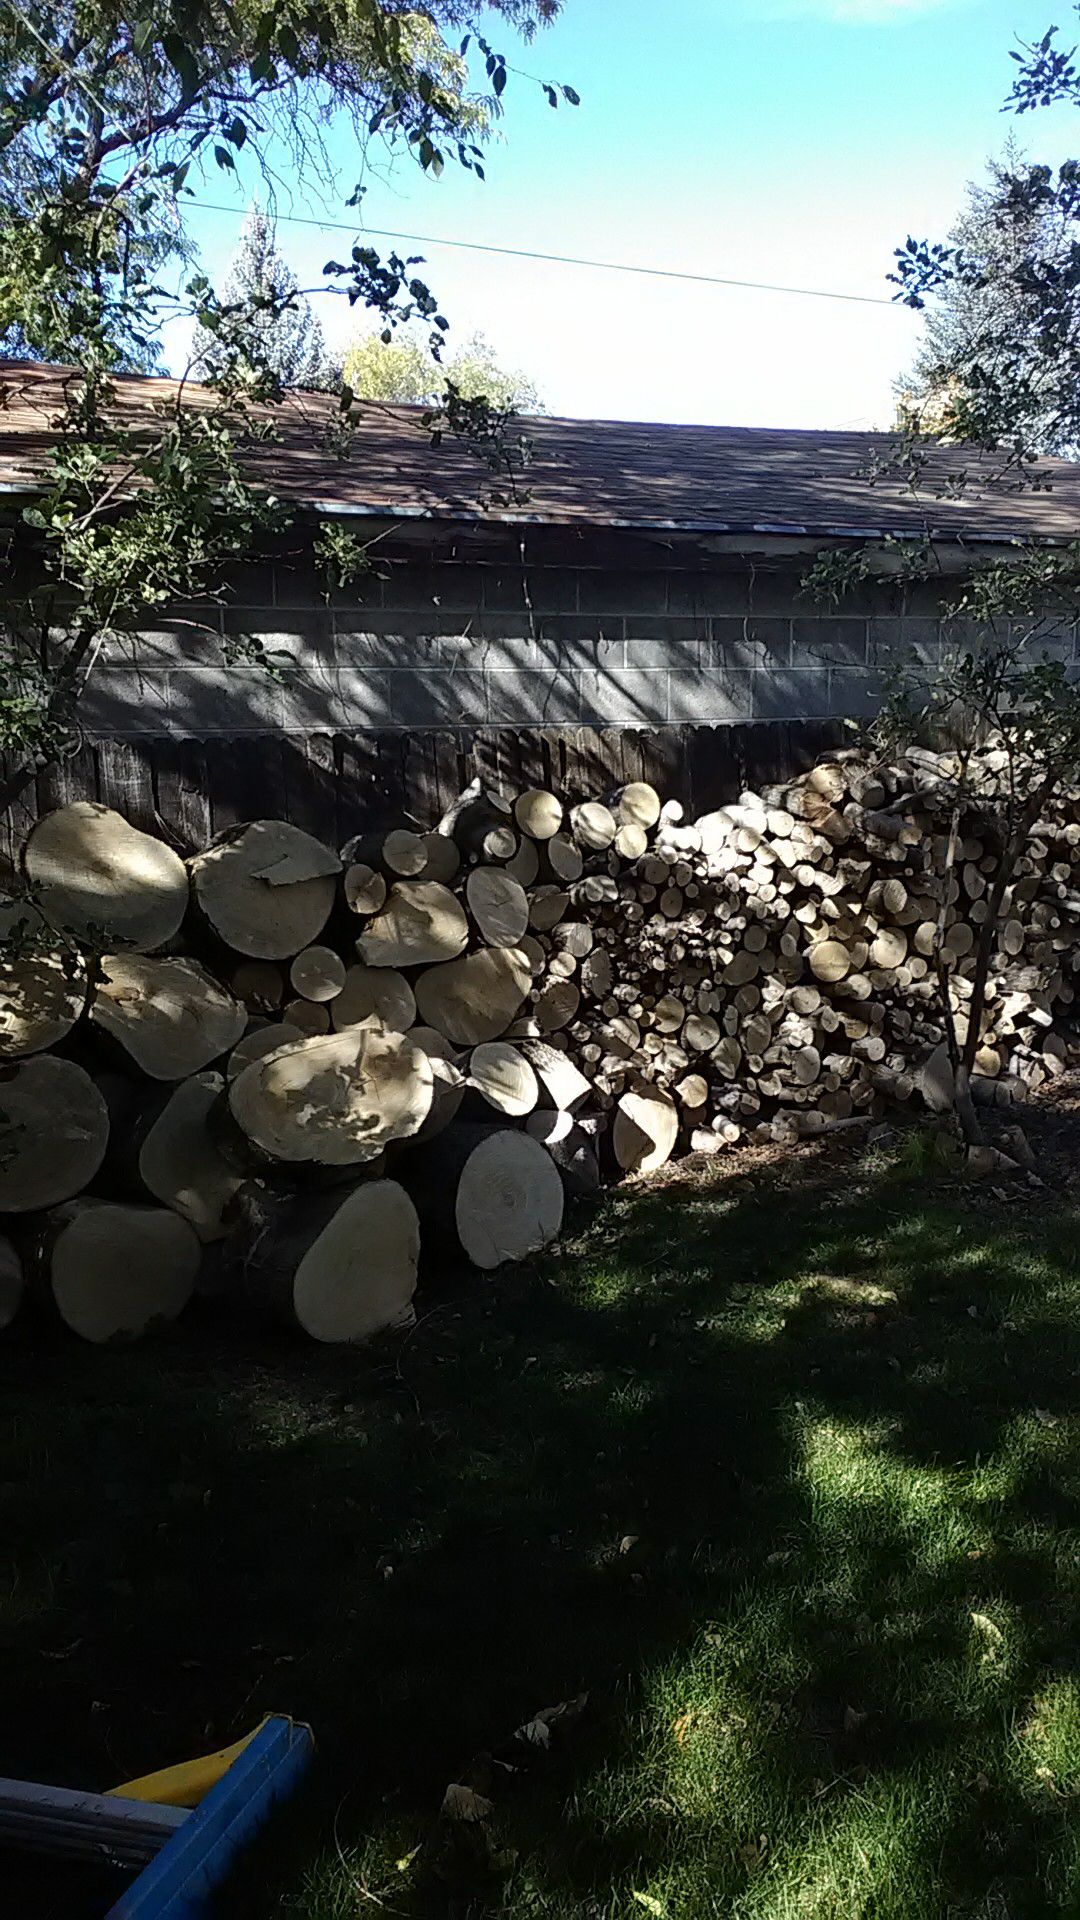 1 1/2 cords of firewood